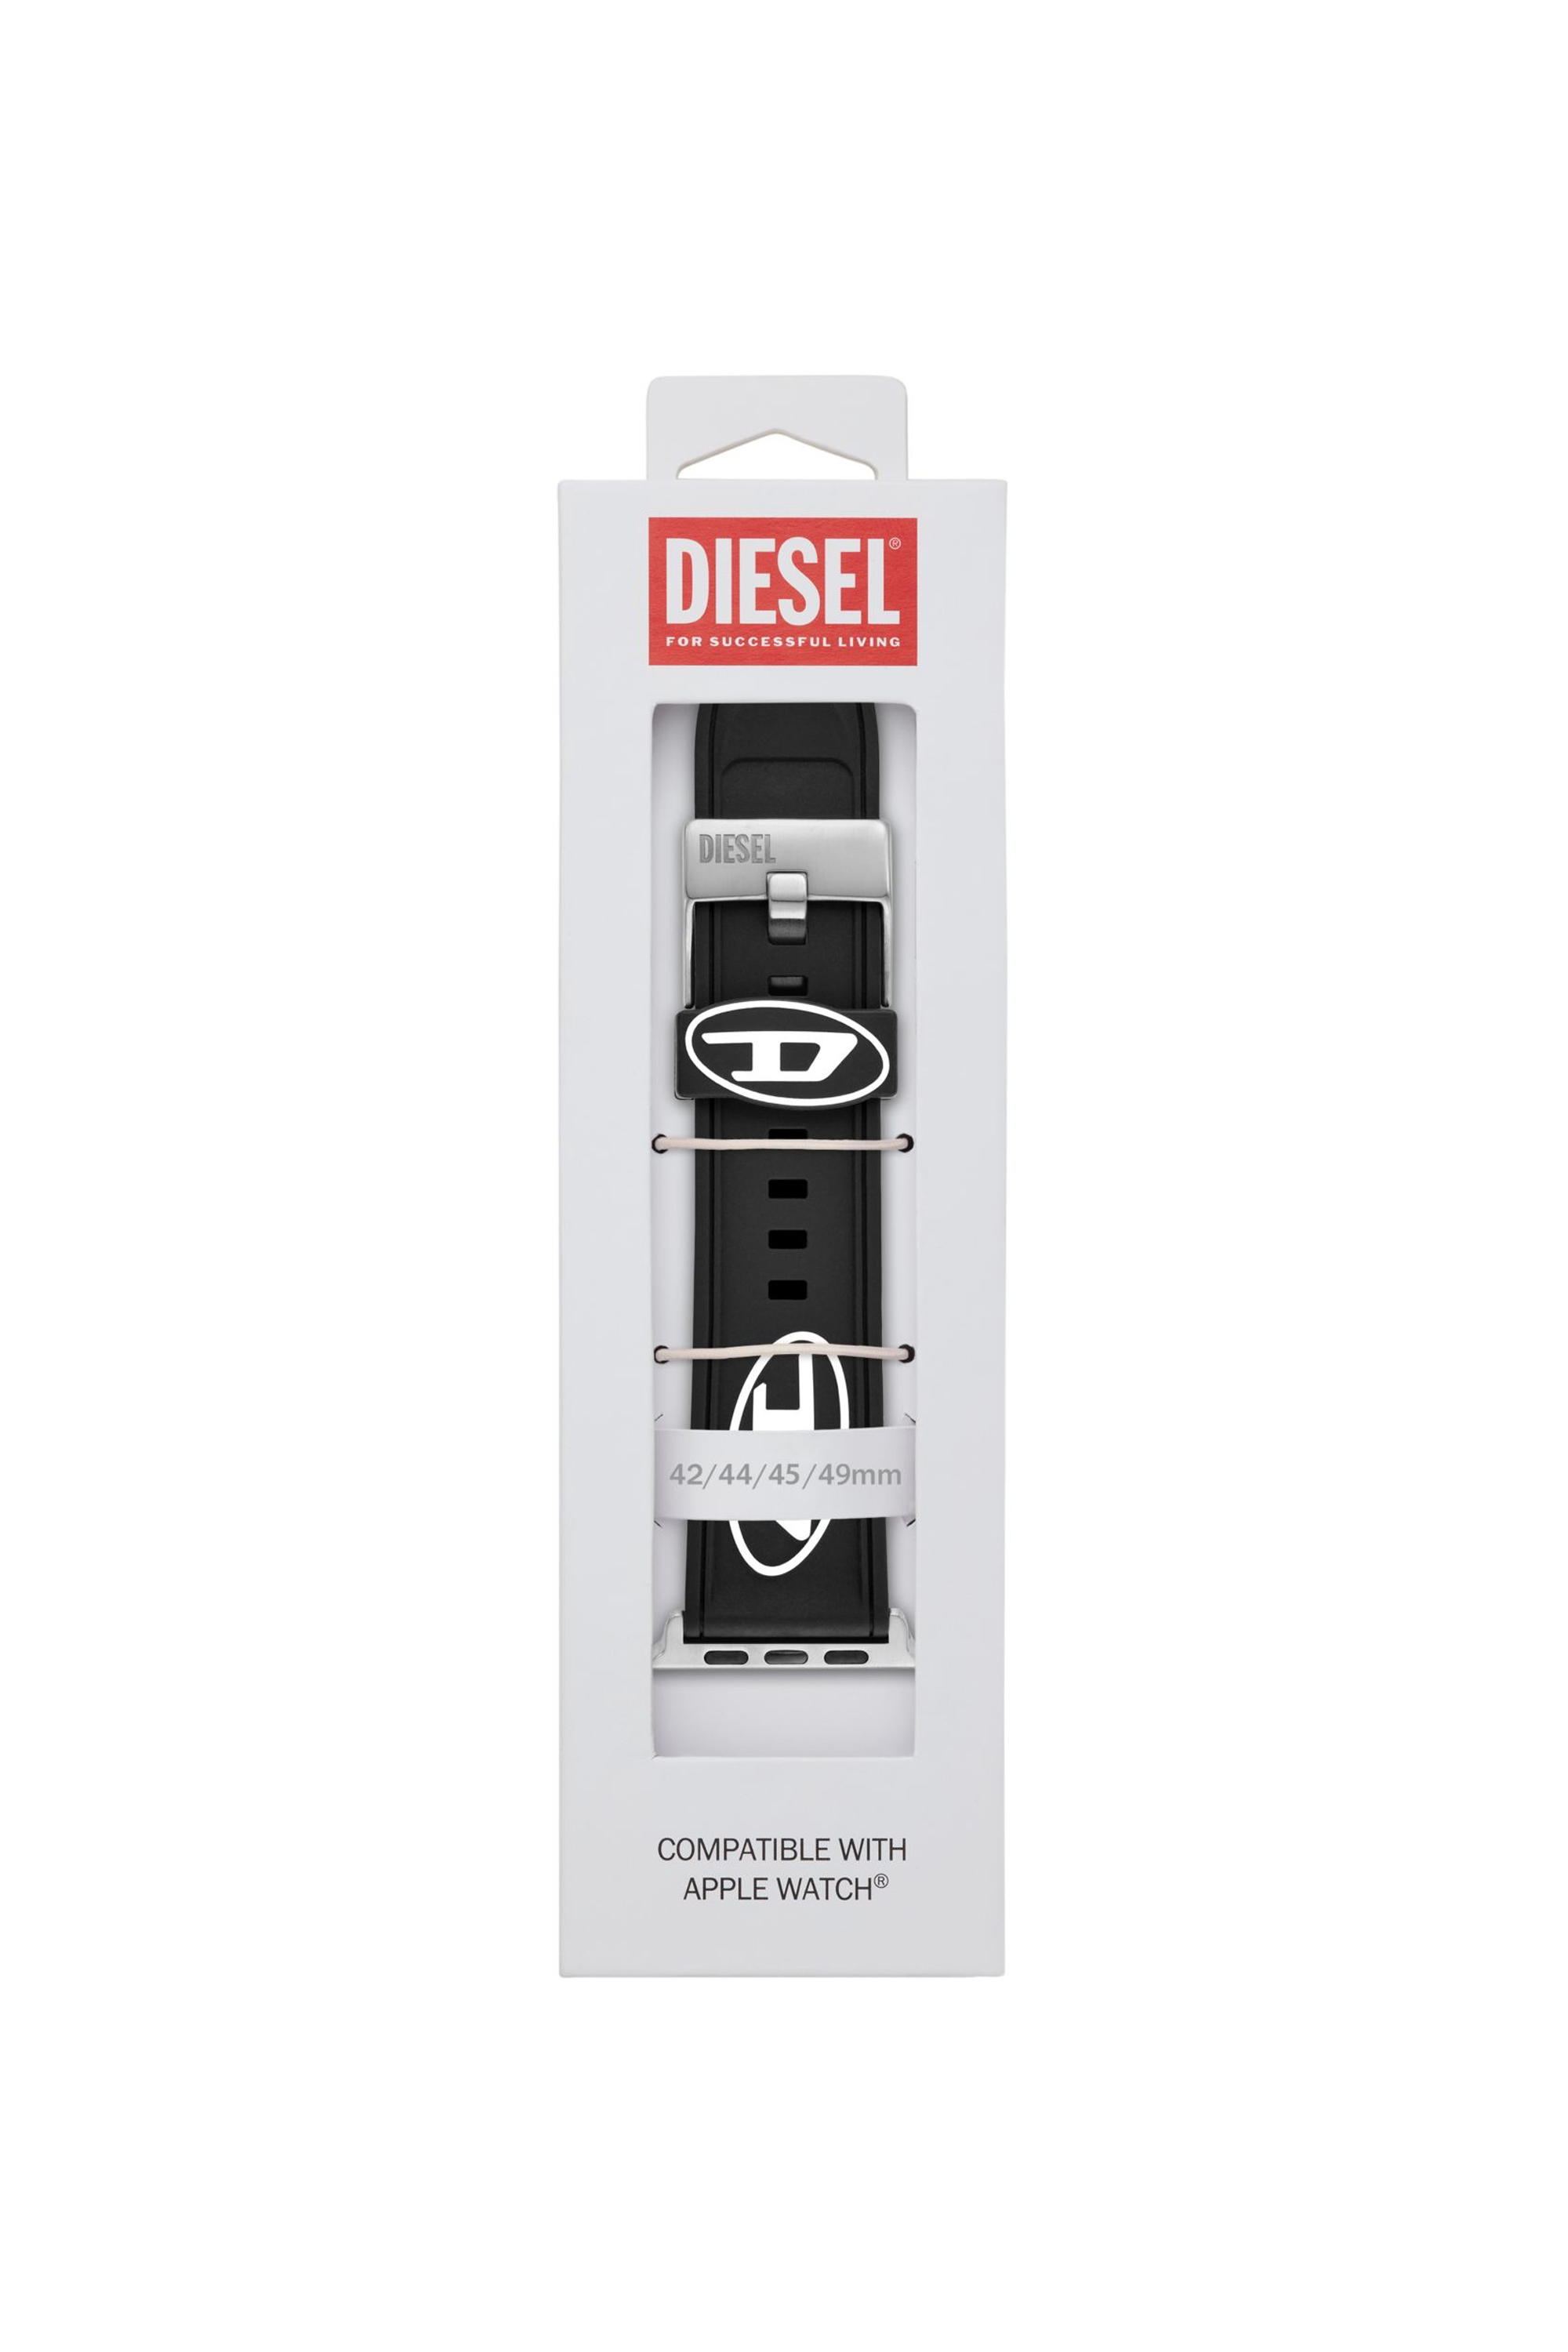 Diesel - DSS0018, Man Black silicone band for apple watch®, 42/44/45/49mm in Black - Image 3